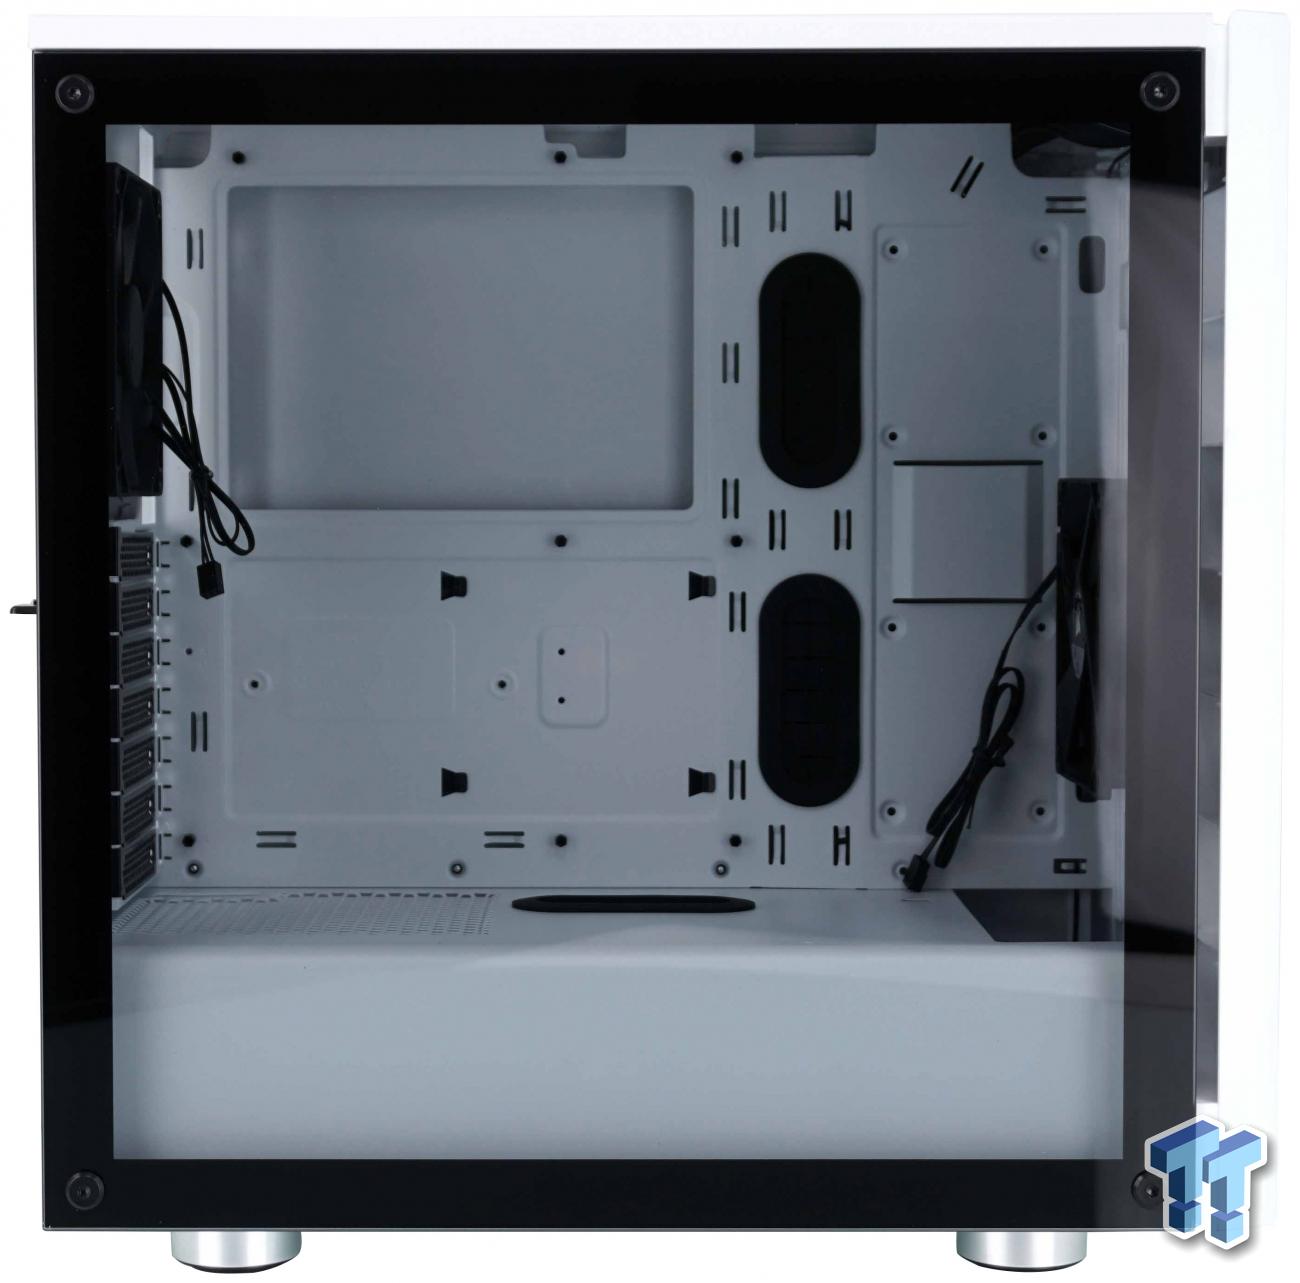 Corsair 275R Mid-Tower Gaming Chassis Review